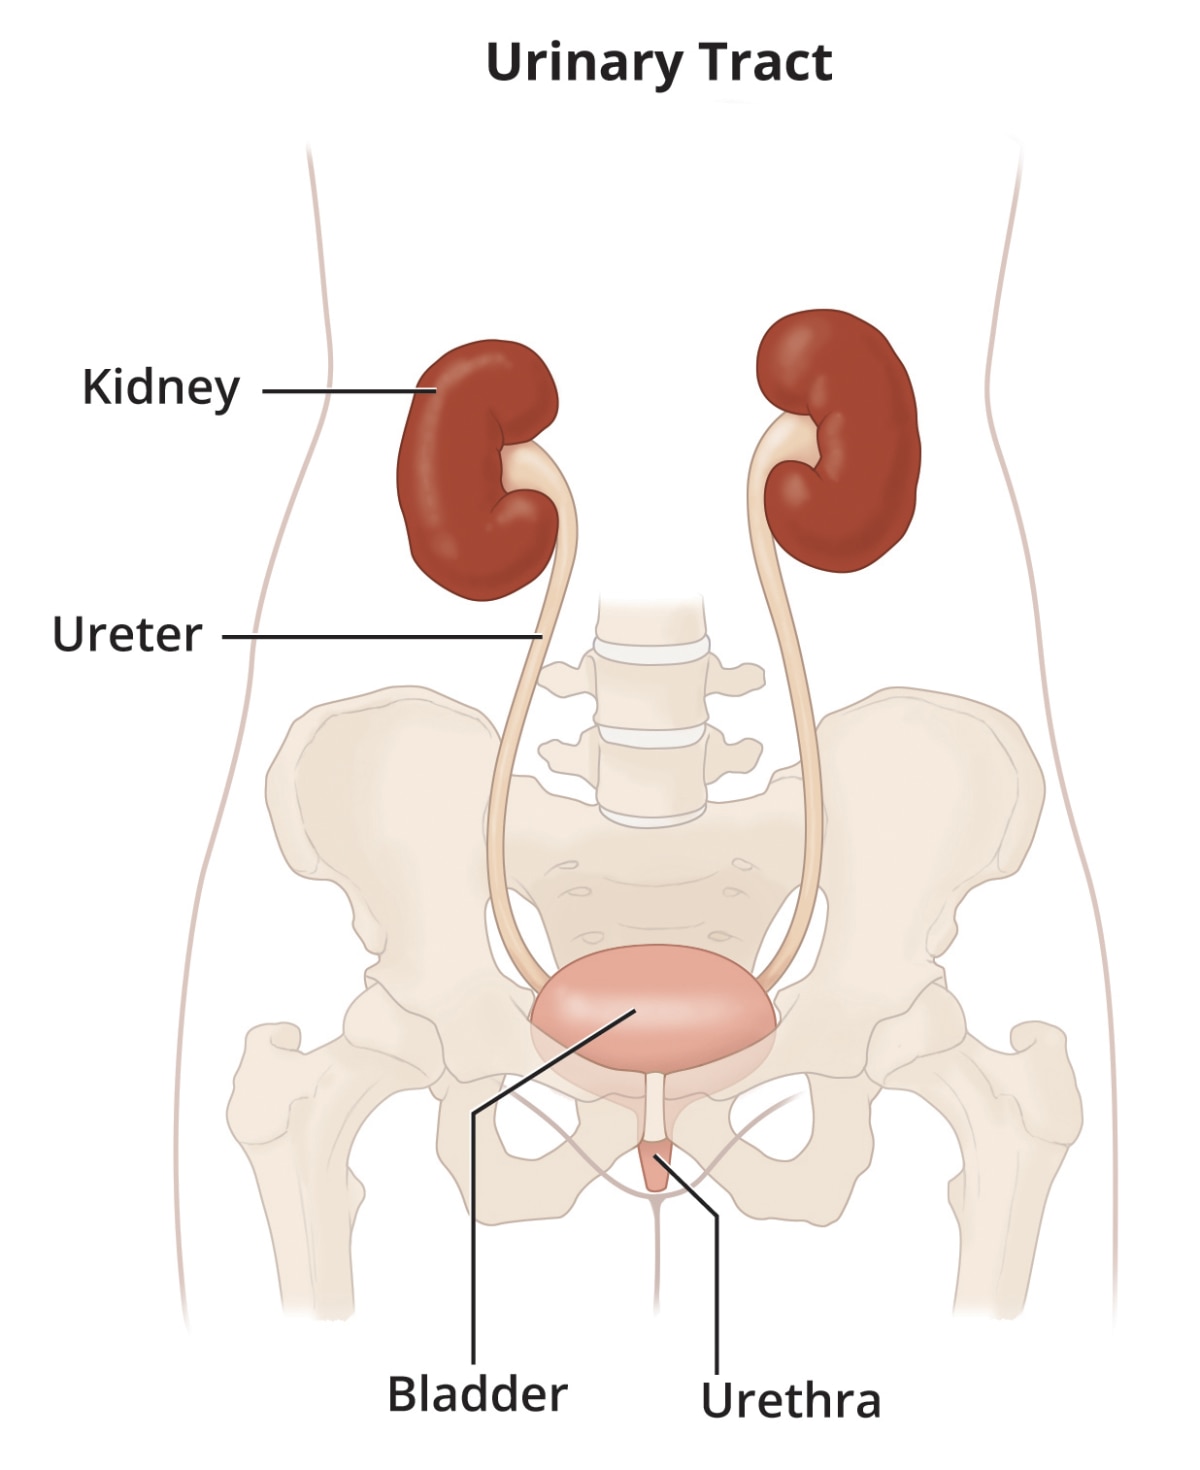 Urinary Tract Obstruction